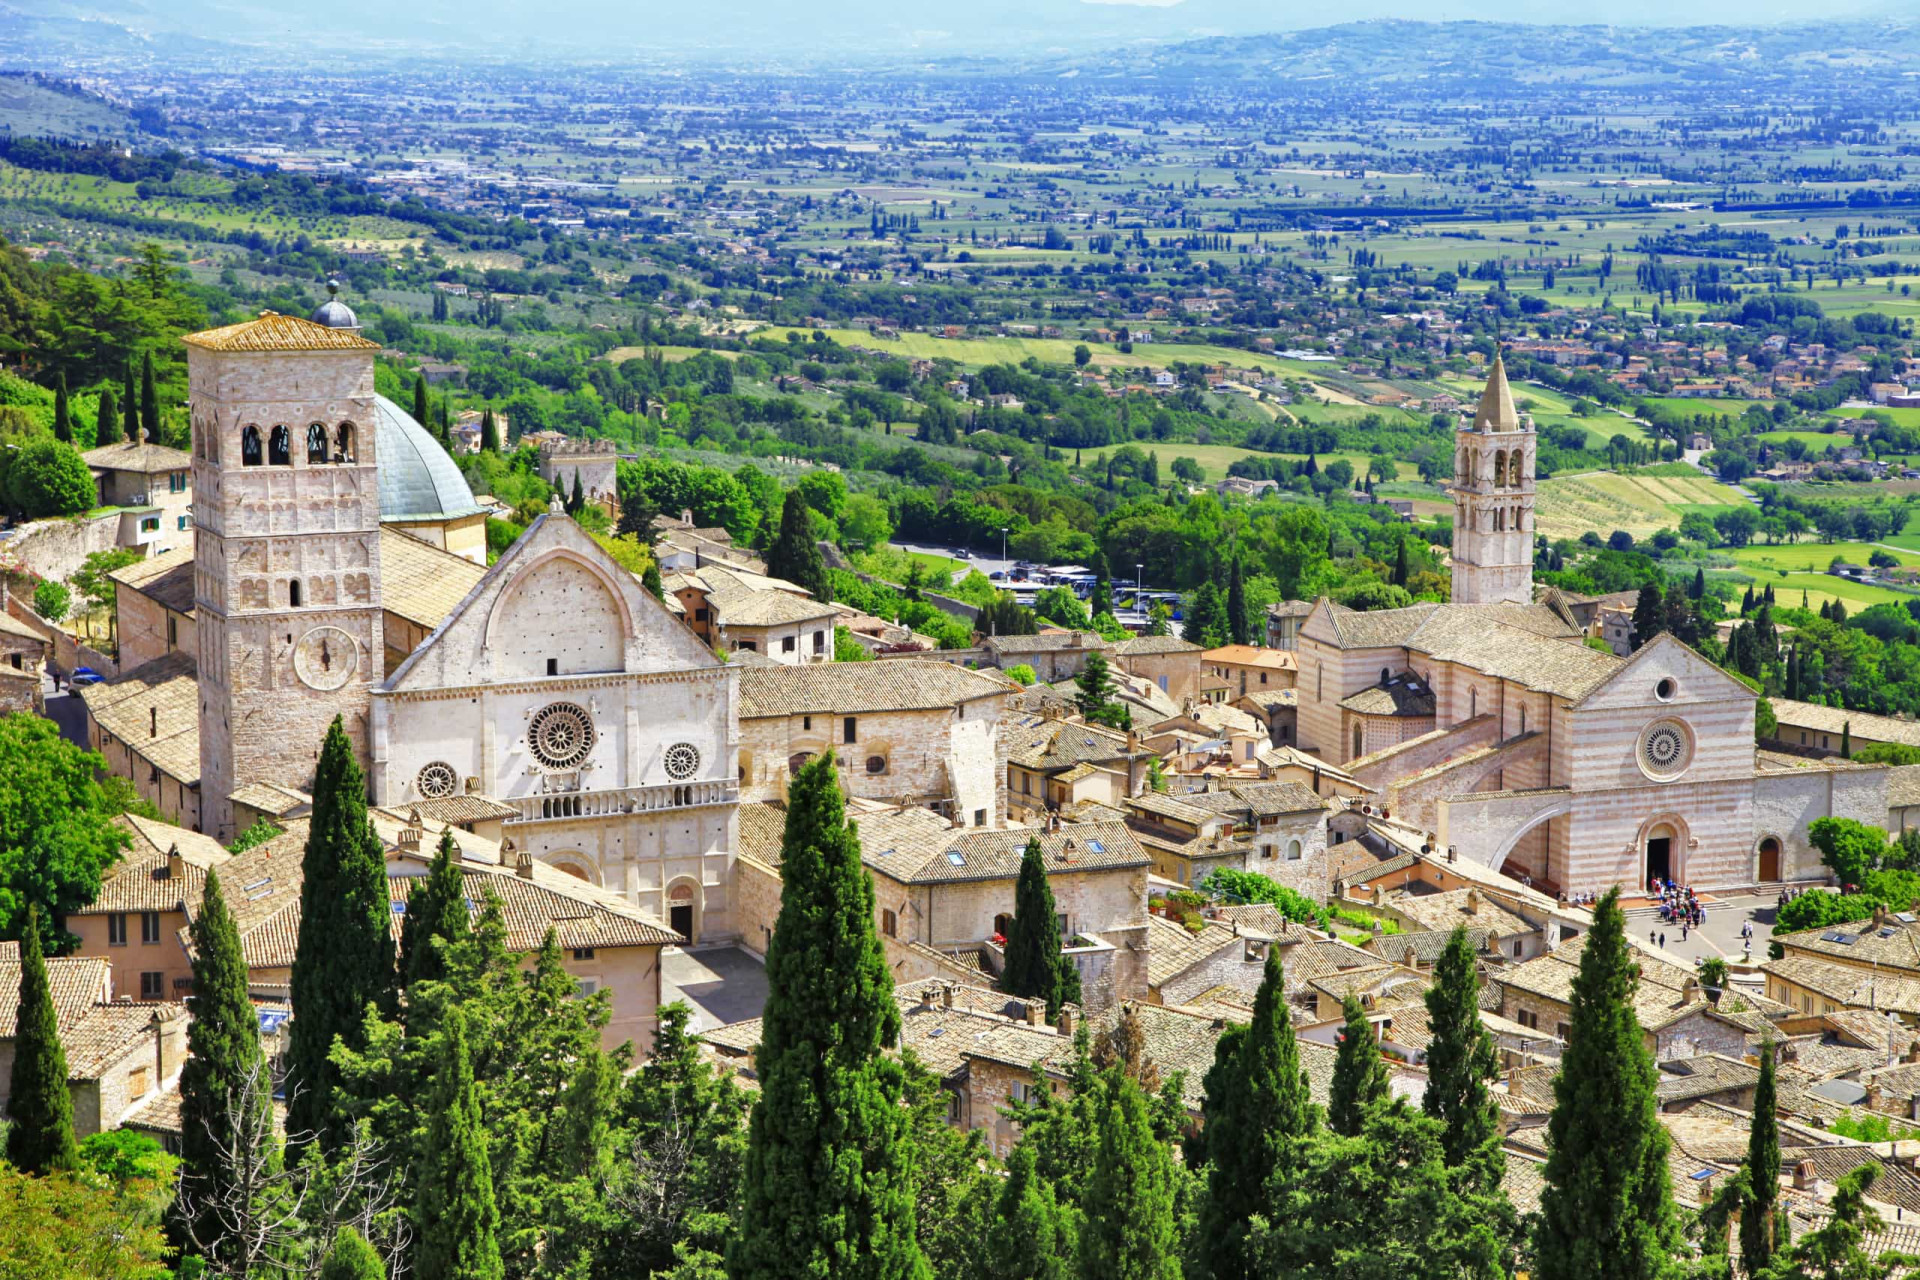 <p>Revered as the birthplace of St. Francis (1182–1226) who founded the Franciscan religious order in the town in 1208, Assisi is one of the most famous towns in Italy. A beautiful place of peace and prayer, much of the town appears as it would have in St. Francis' day.</p>